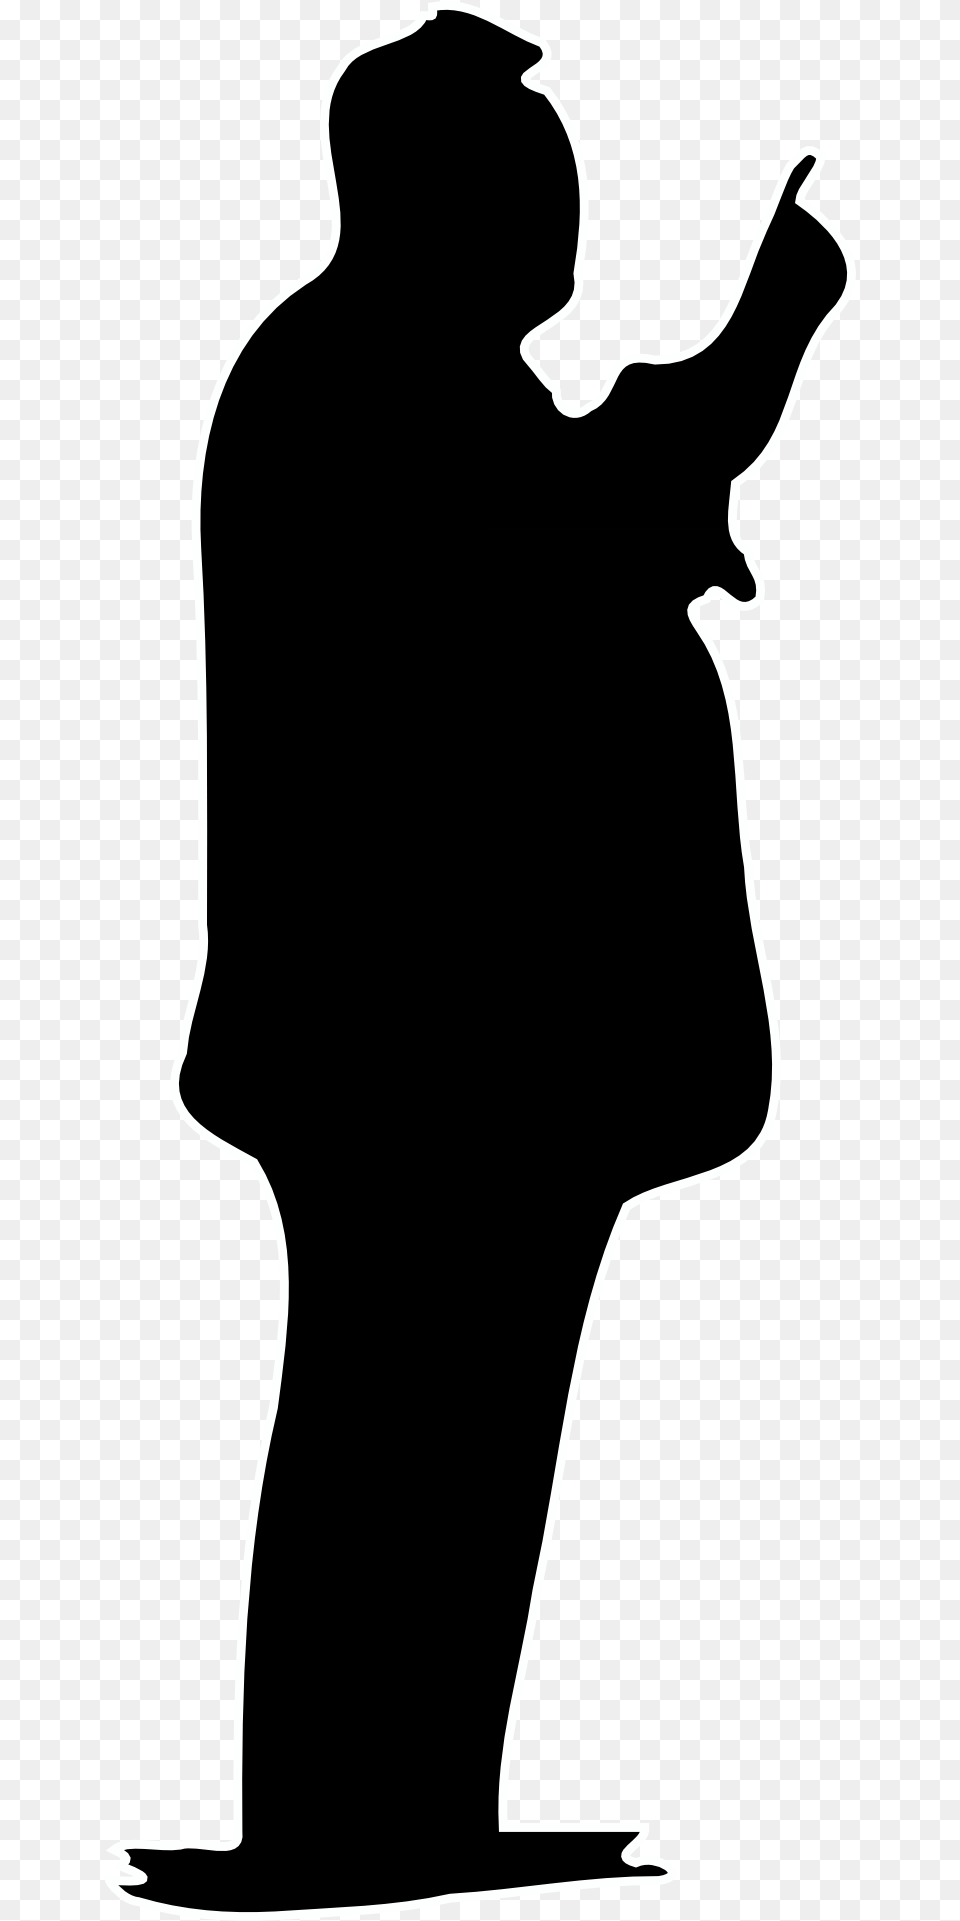 James Bond Silhouette Clip Art Chess Piece Knight Silhouette Free Transparent Png